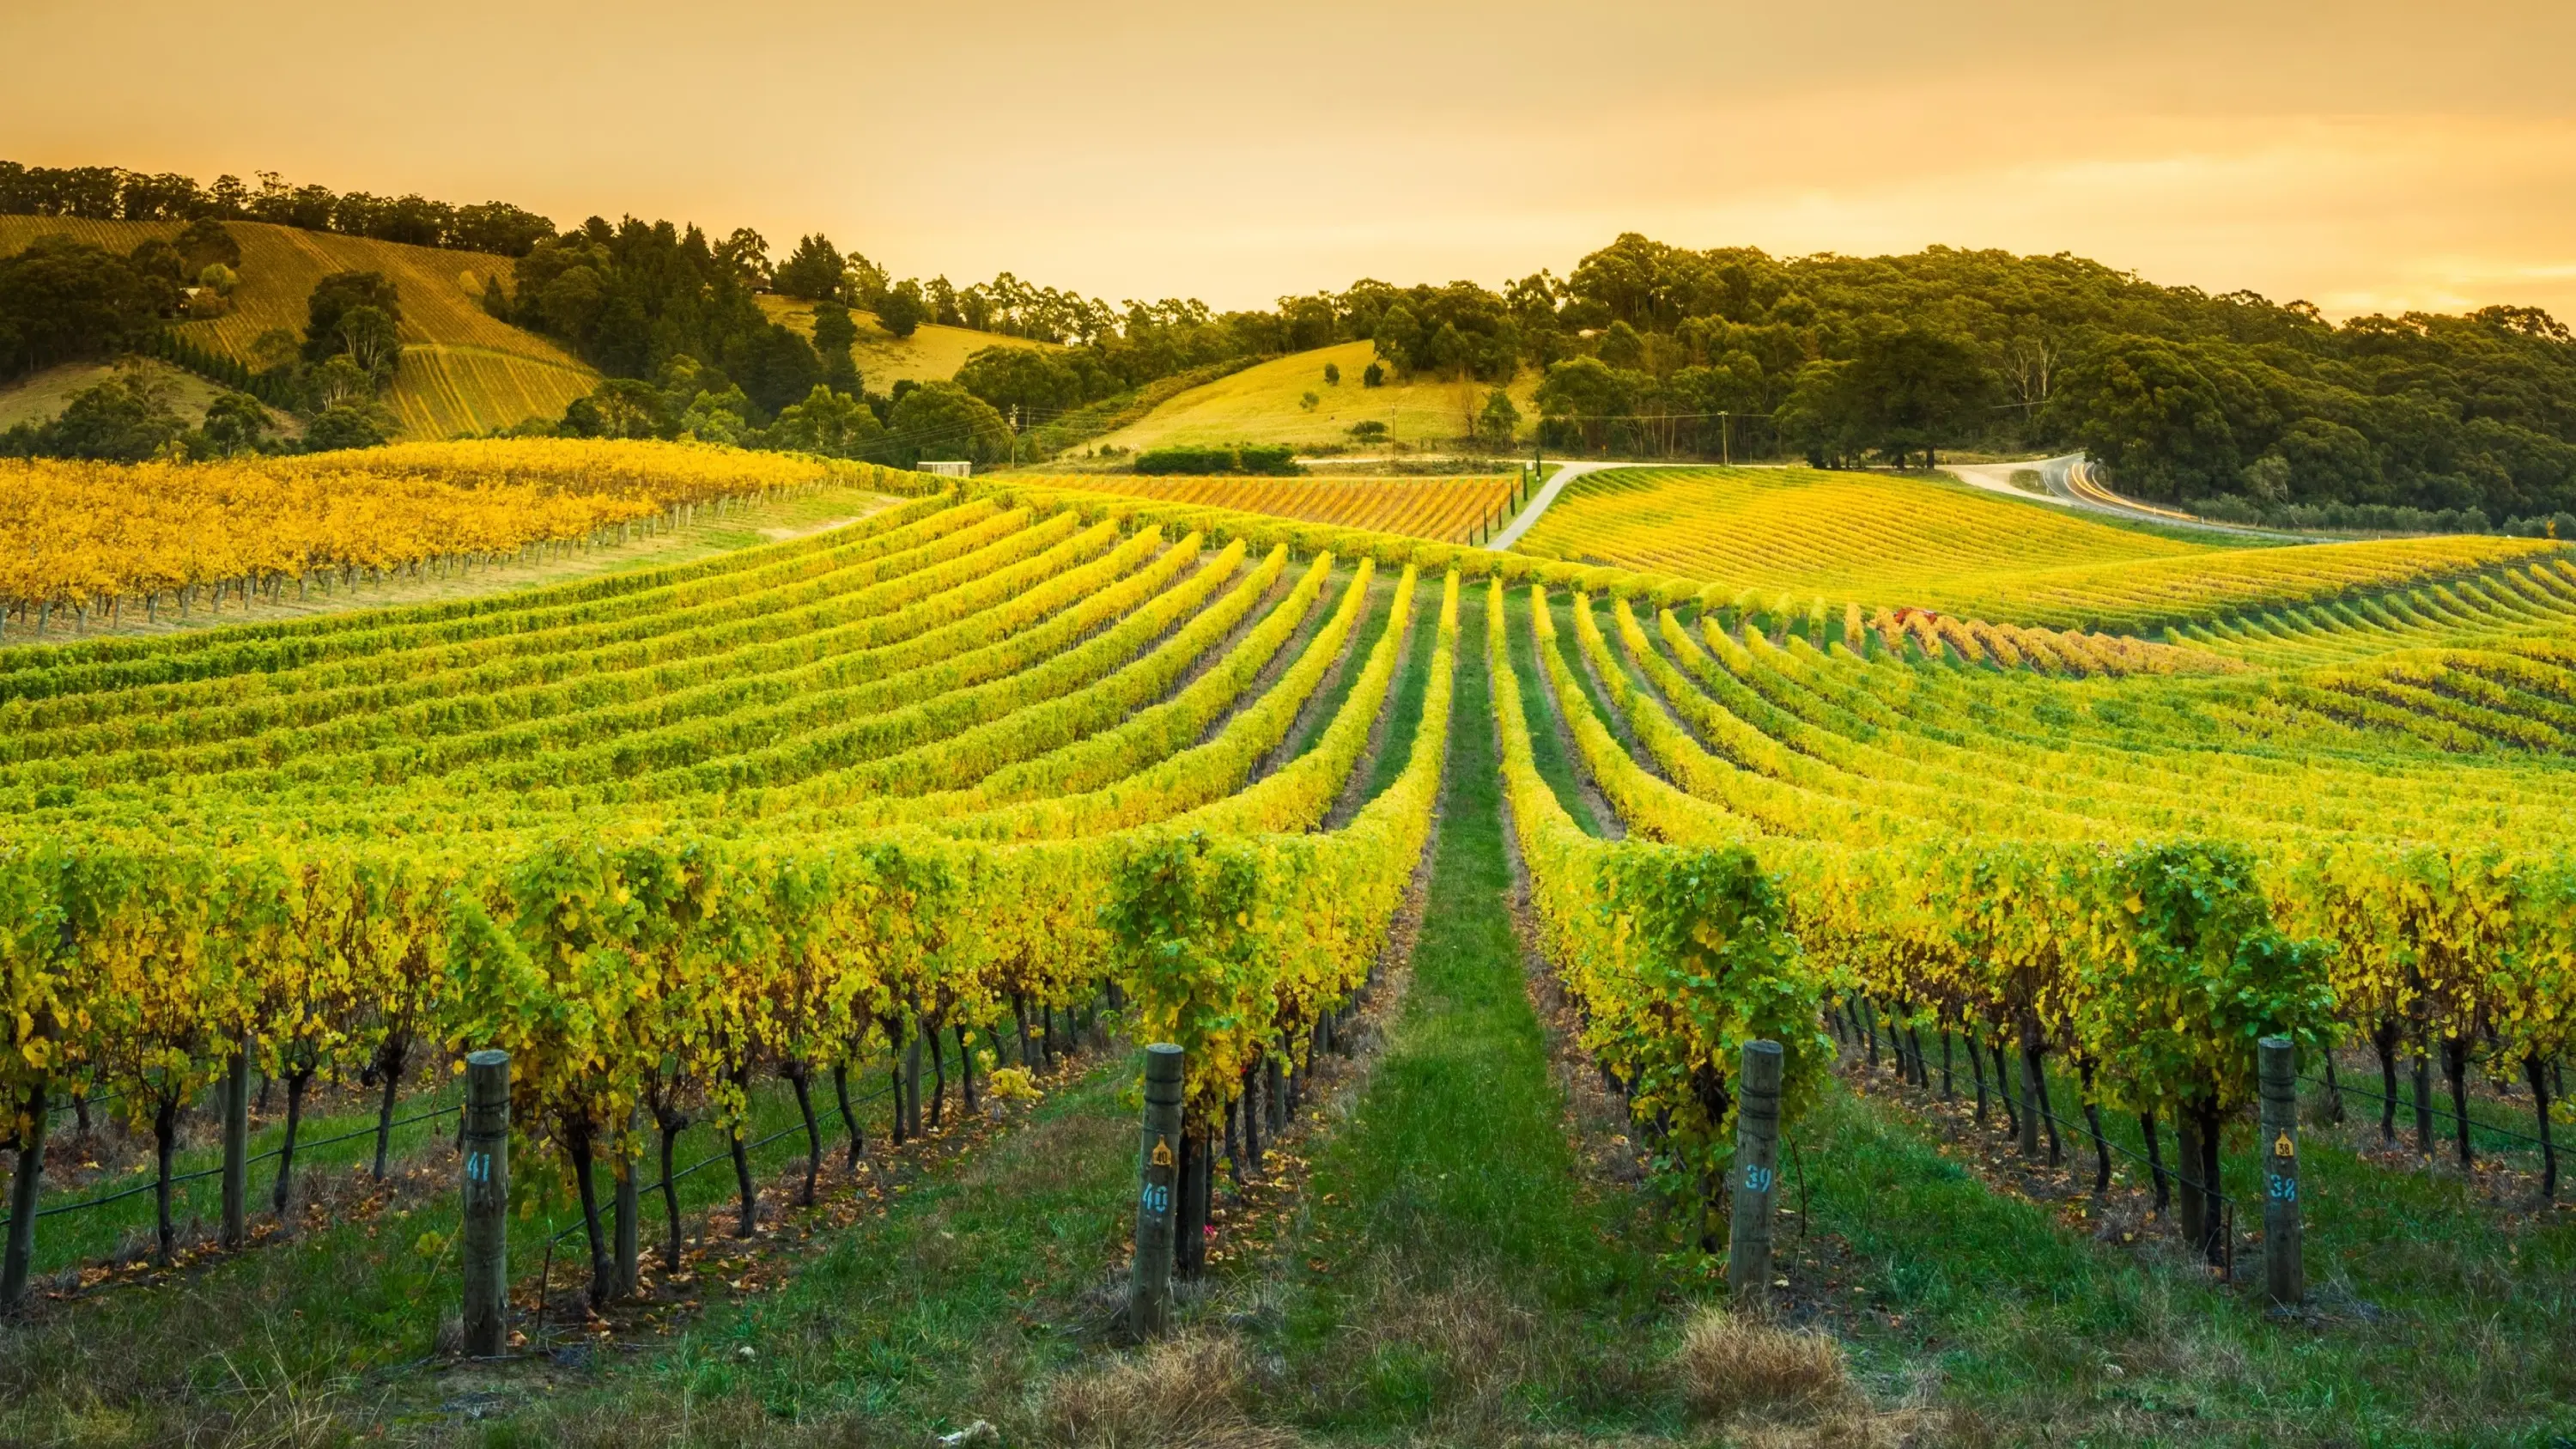 A vineyard with rows of leafy vines in the Adelaide Hills at dusk. Image credit: adobe.stock.com